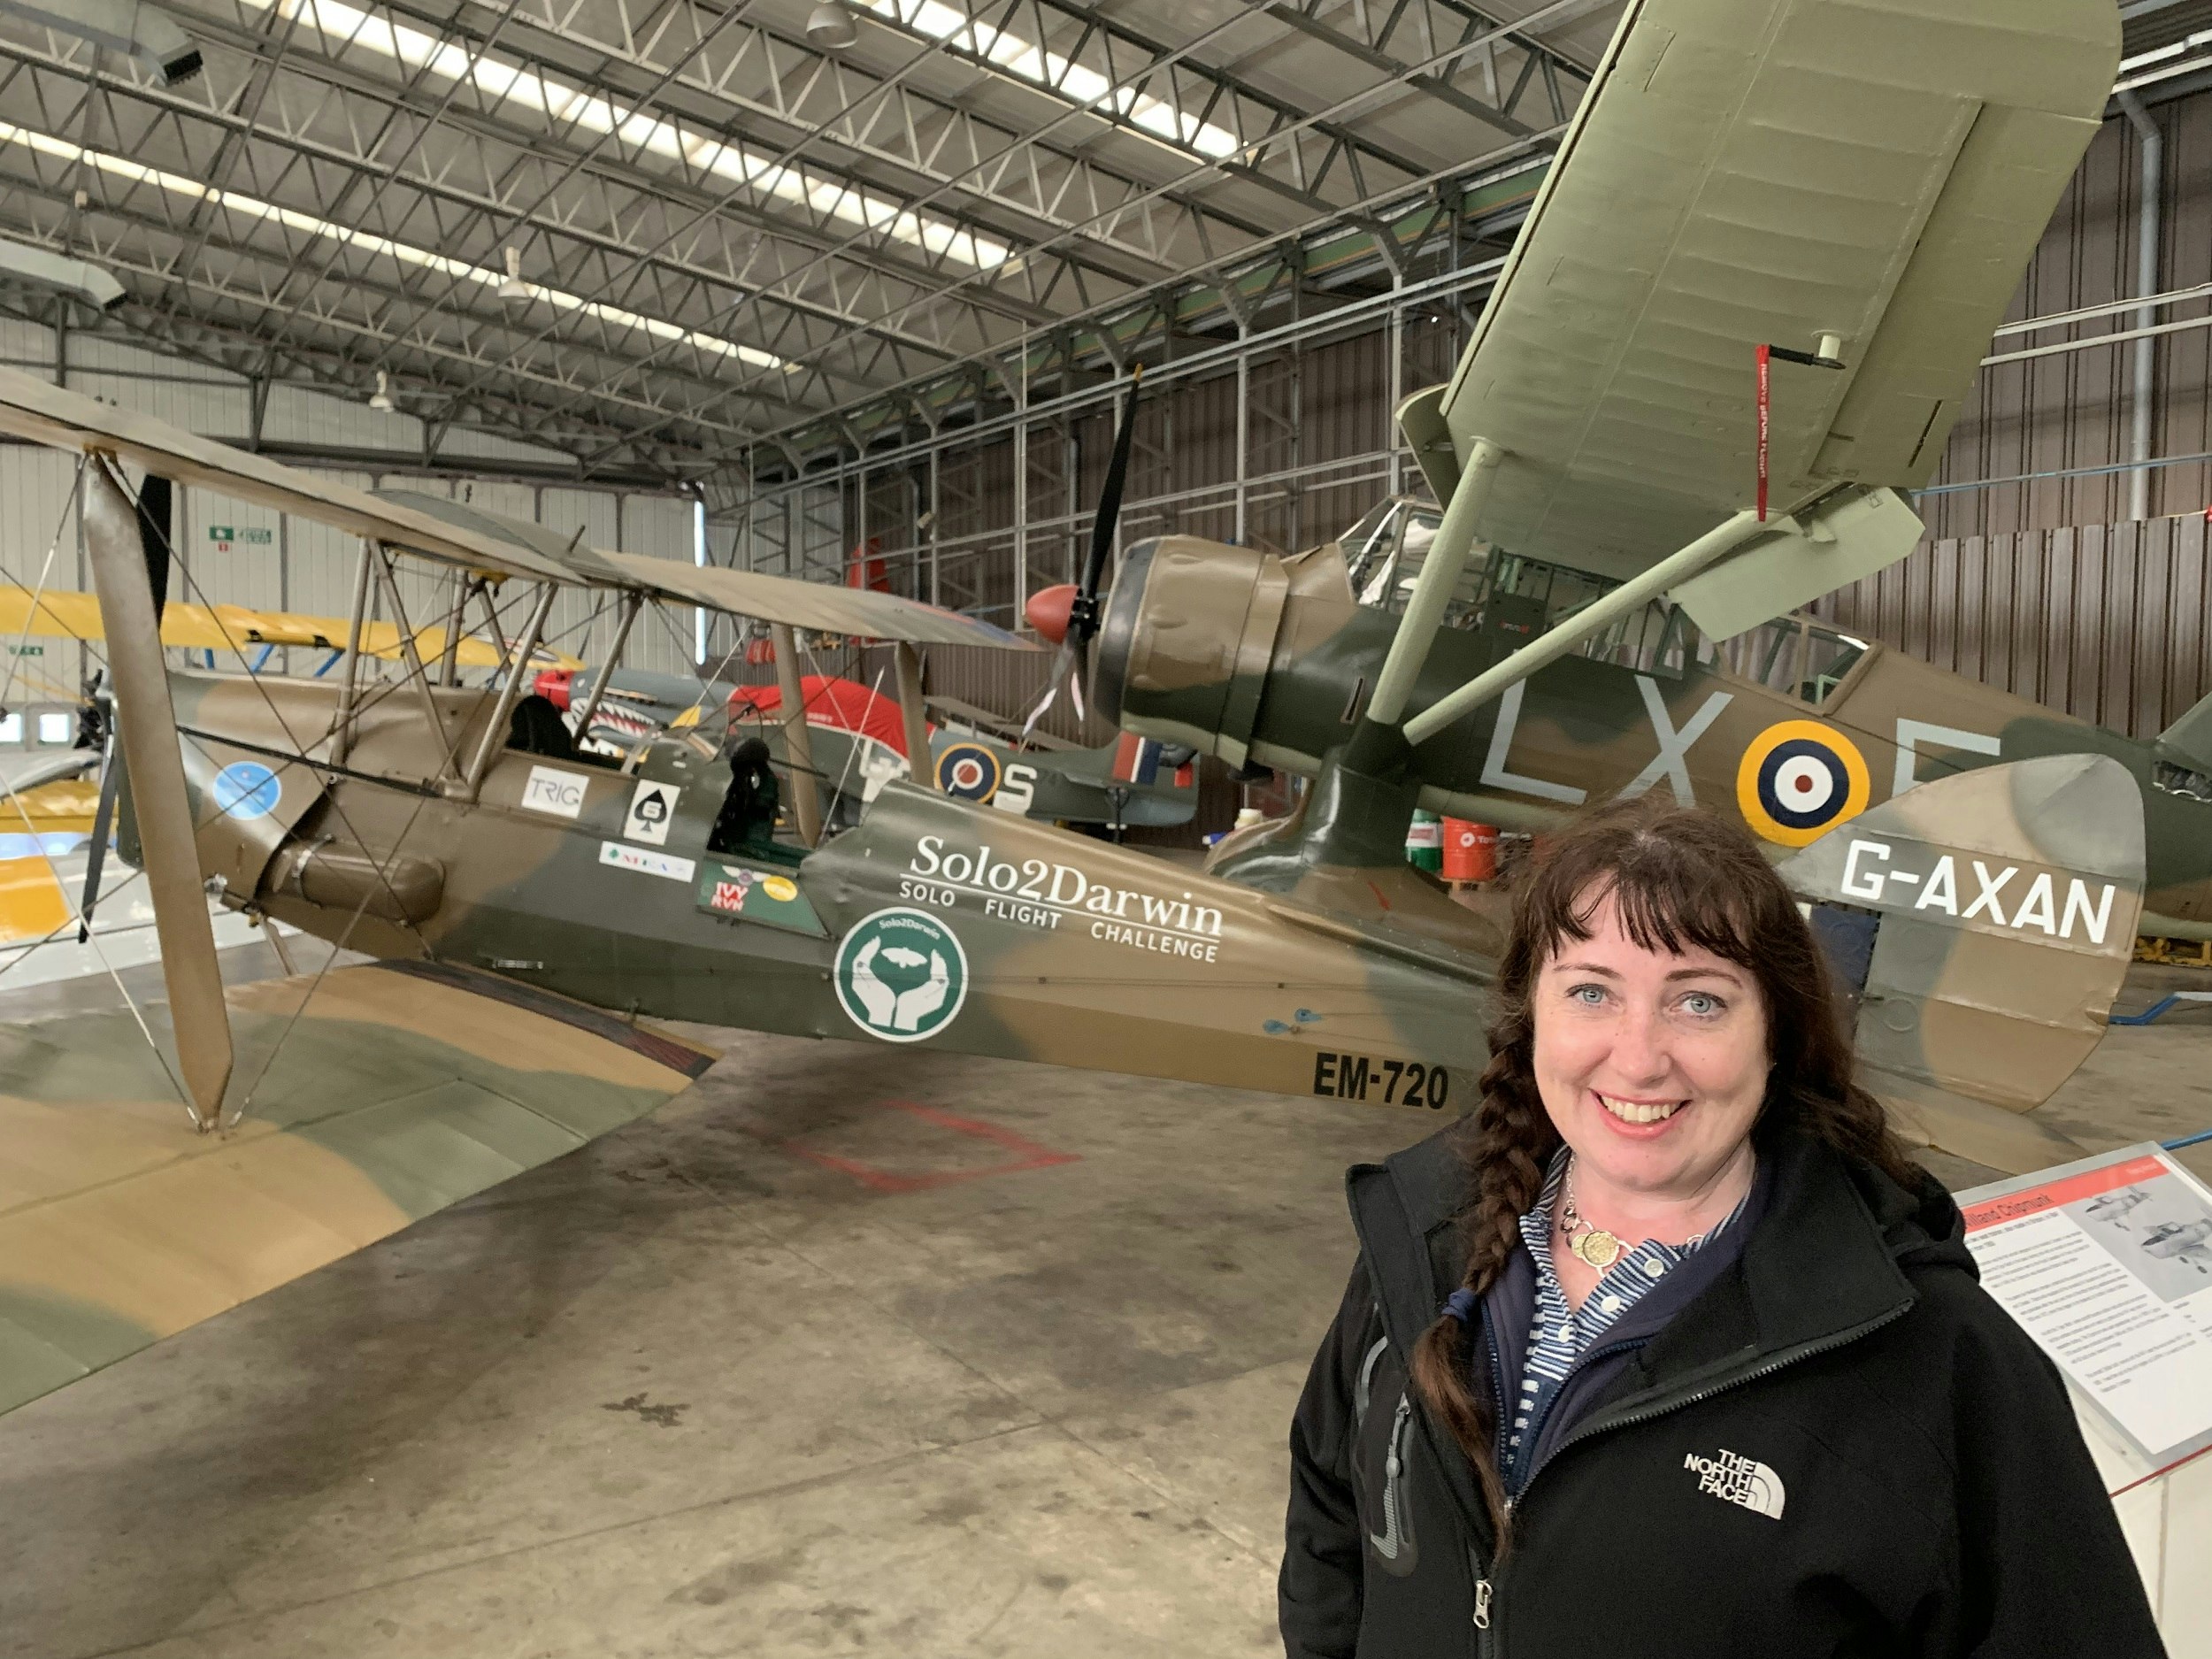 A female pilot stands near her aircraft which is in a hangar. The plane is predominantly brown in colour with several colourful stickers, including one that says Ivy (the name of the plane) and RVH (the initials of the pilot's father) 